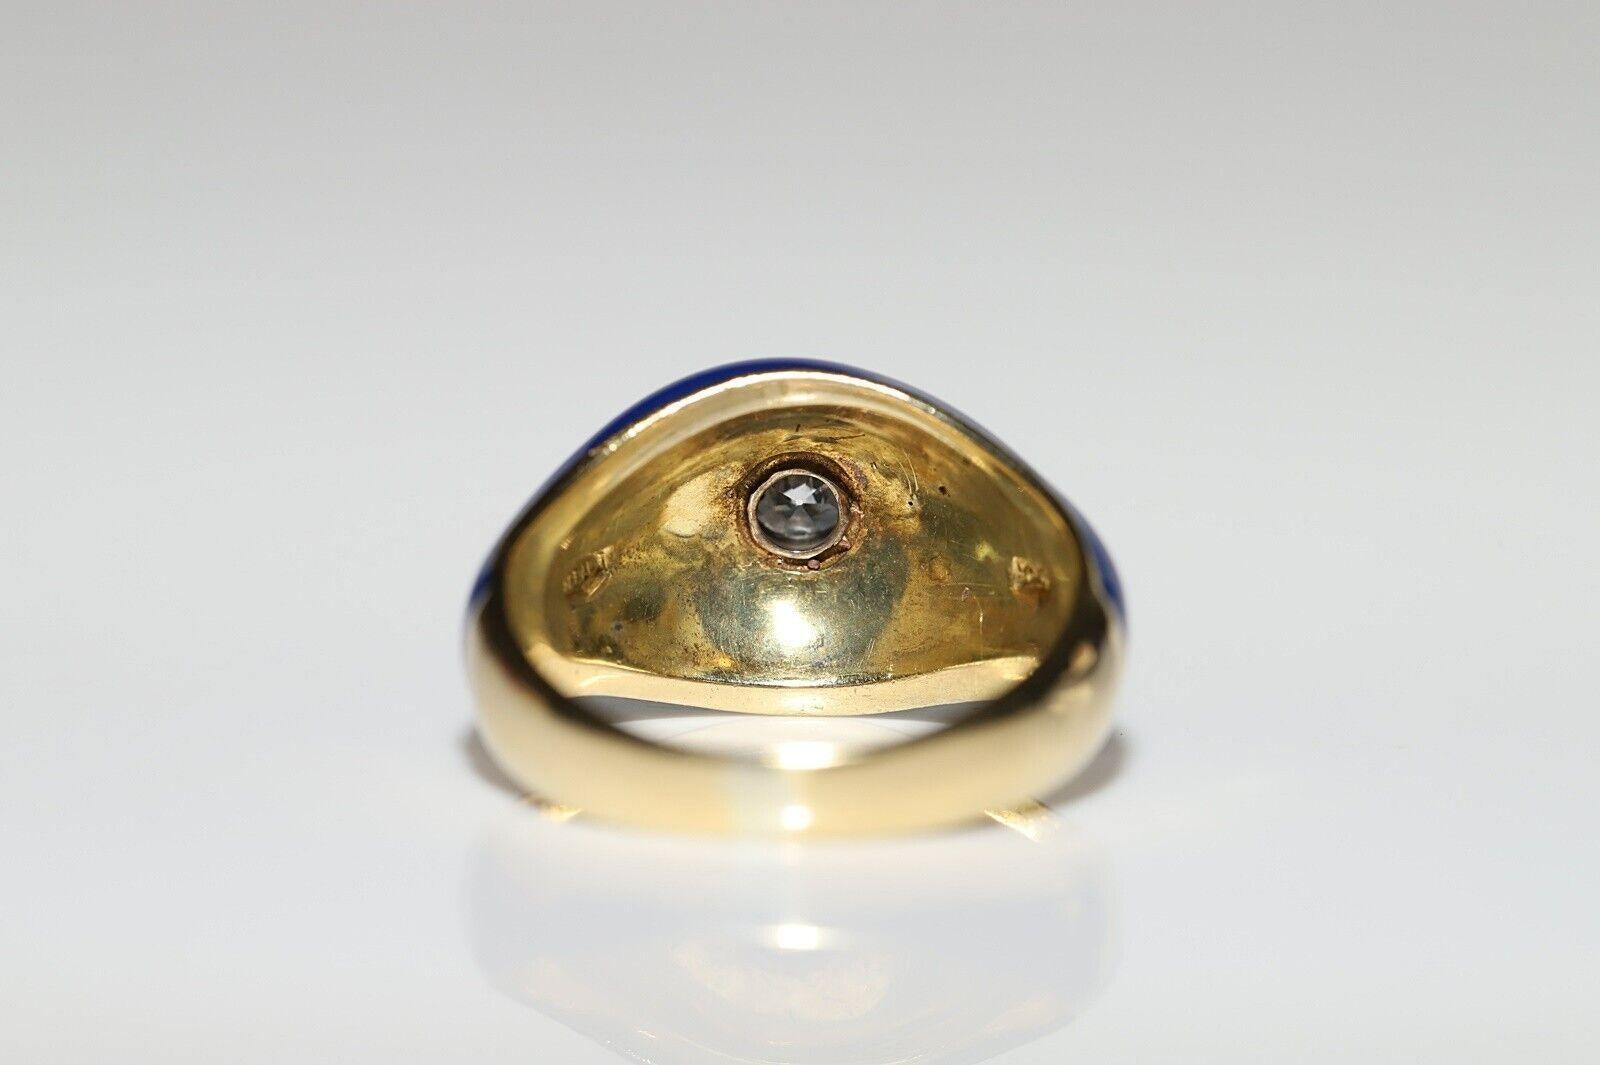 Brilliant Cut Vintage Virca 1970s 18k Gold Natural Diamond And Enamel Decorated Ring  For Sale